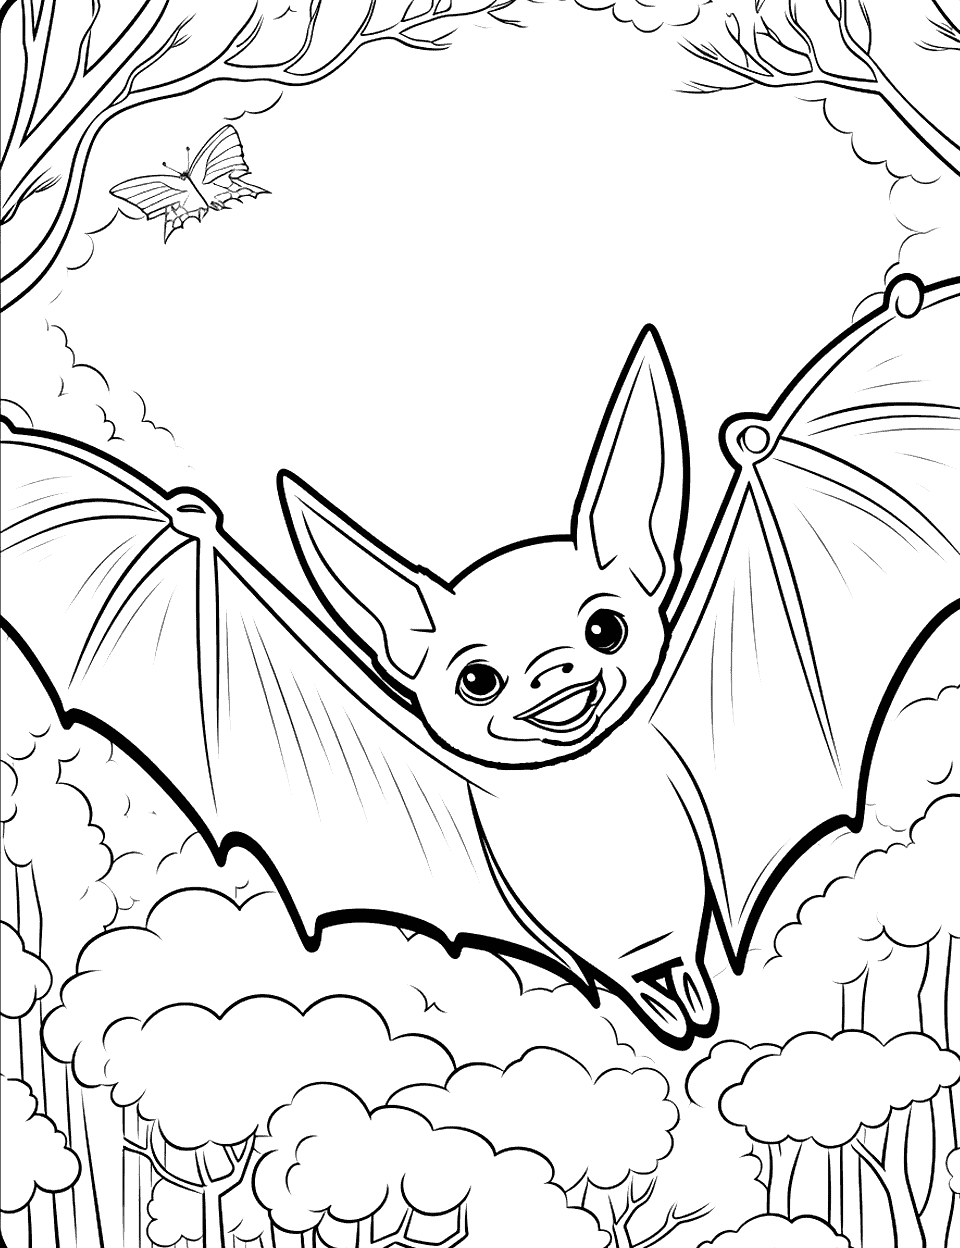 Bat in the Forest Coloring Page - A bat flying through a forest with background details.